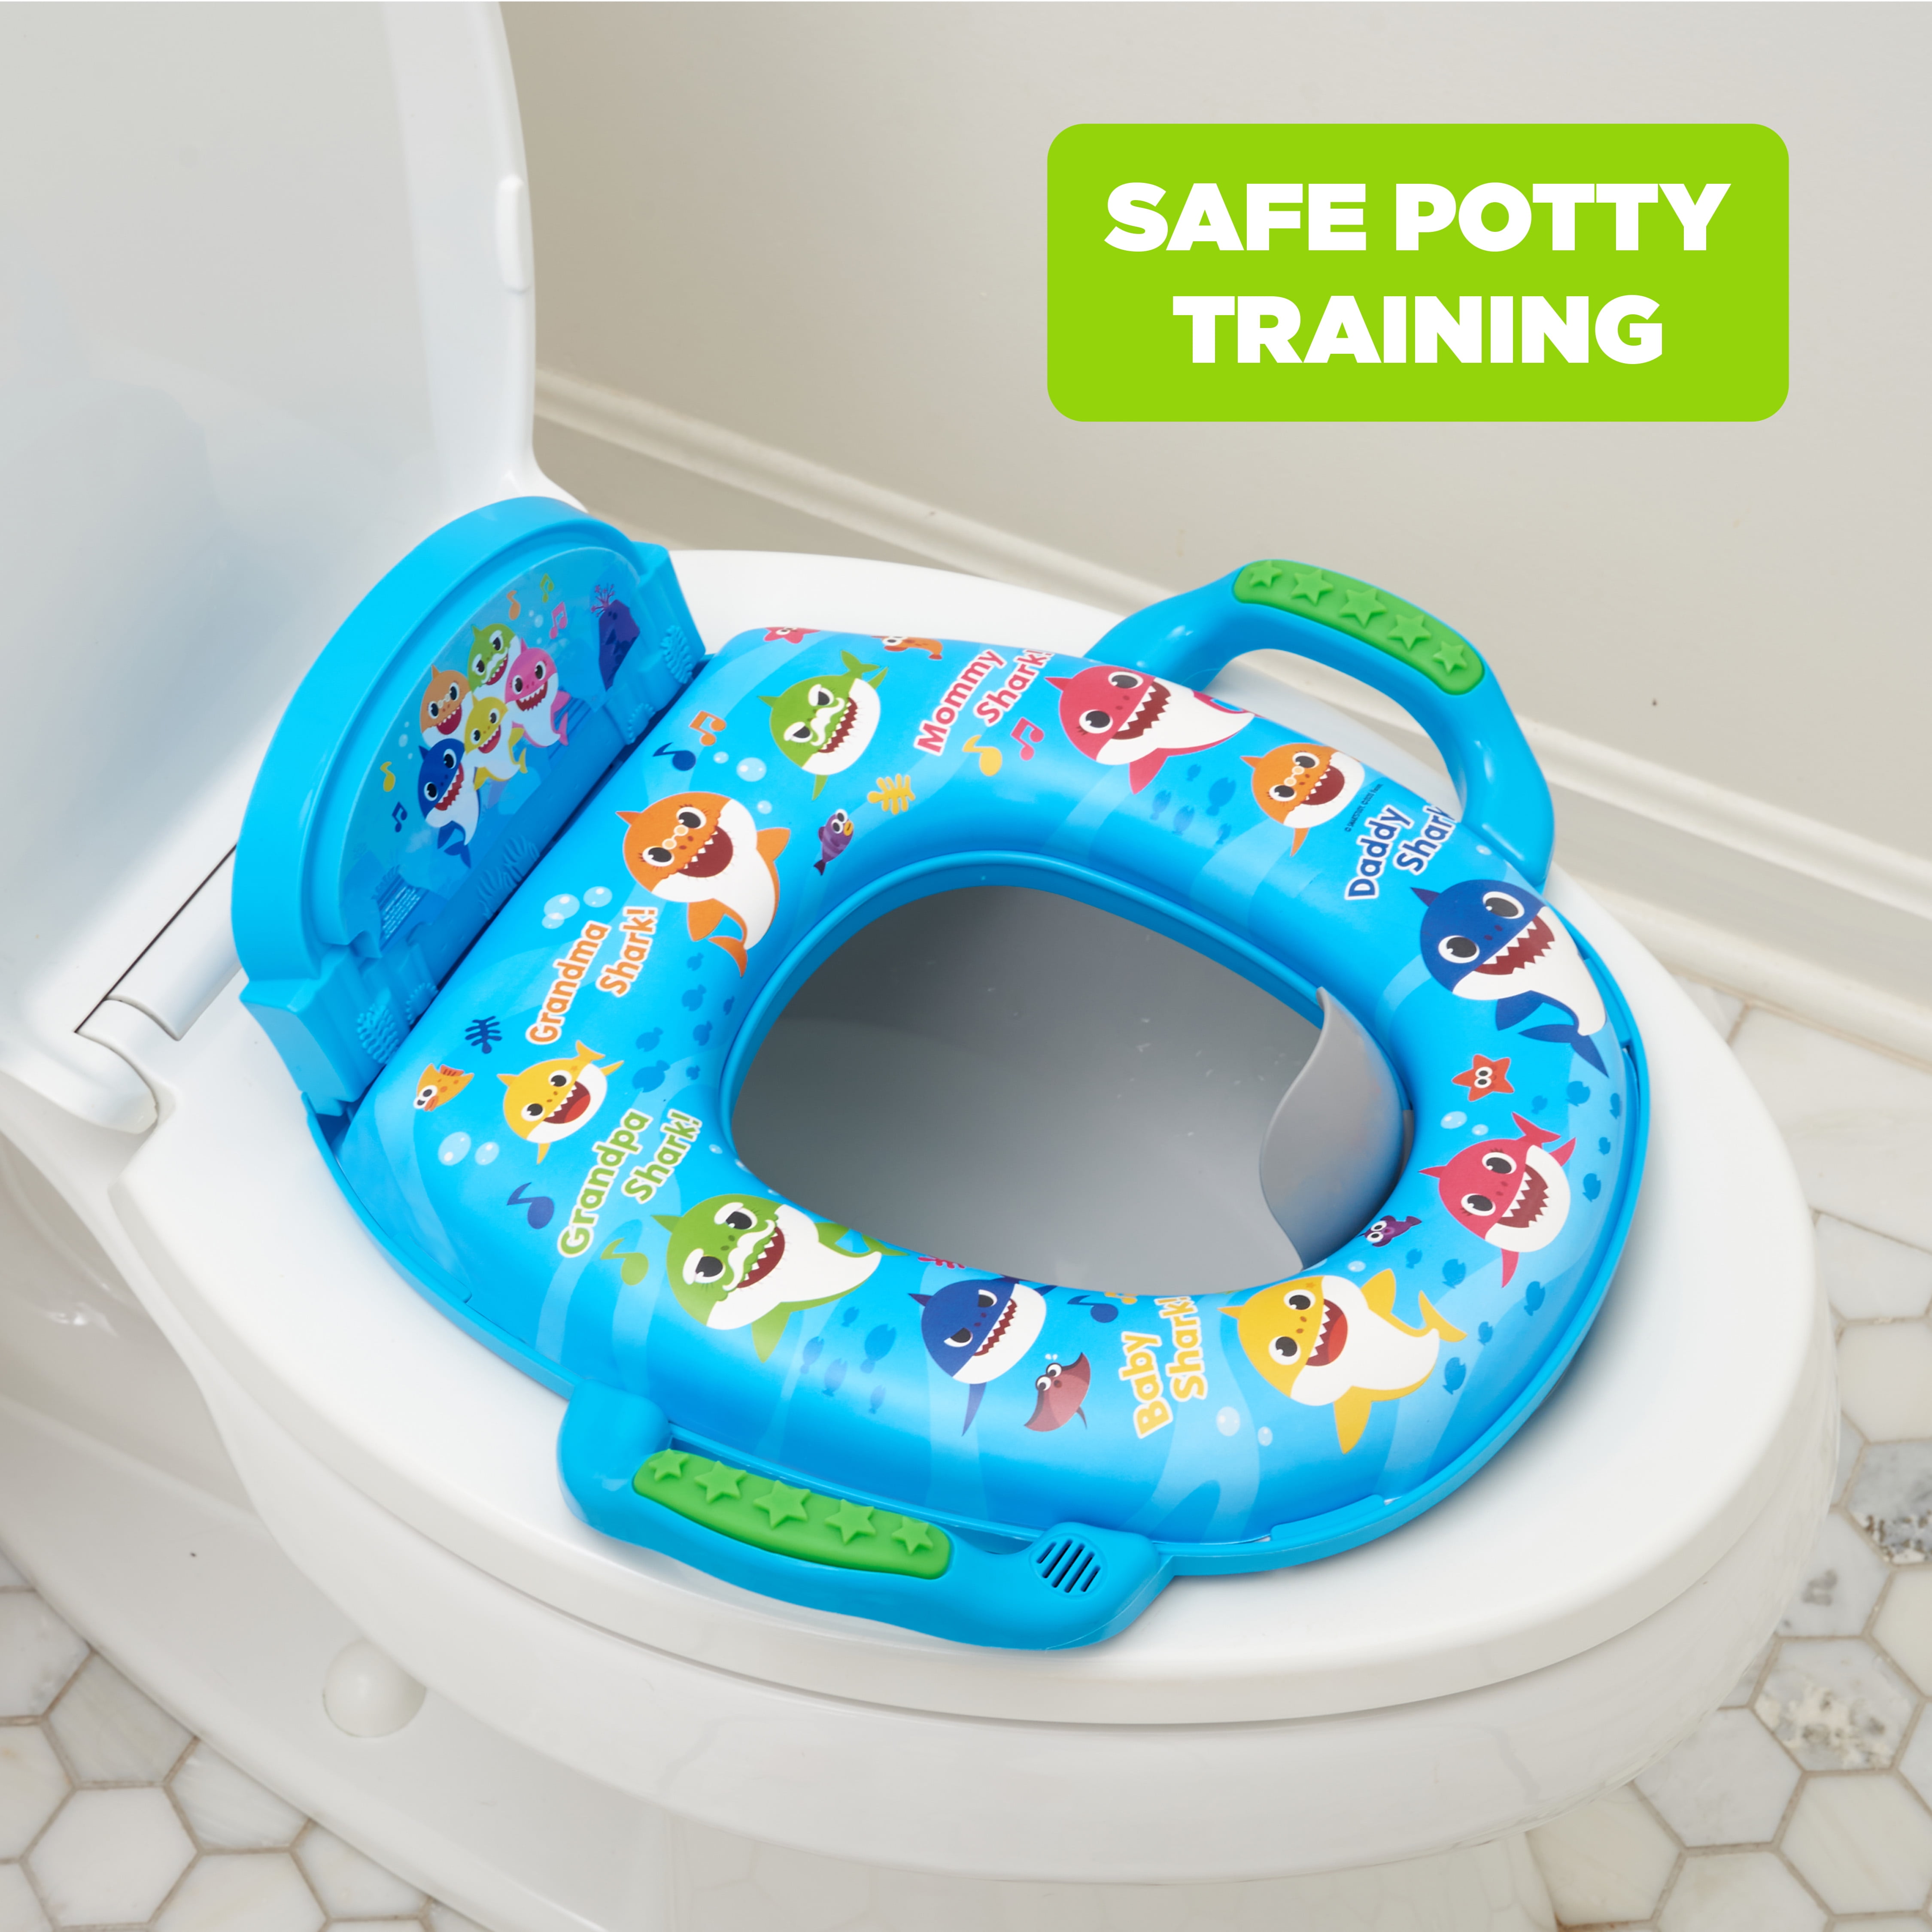 Reusable Potty Seat Covers for Baby Blue Potty Seat for Travel to Keep Your Baby Safe Blue Folding Potty Training Seat 